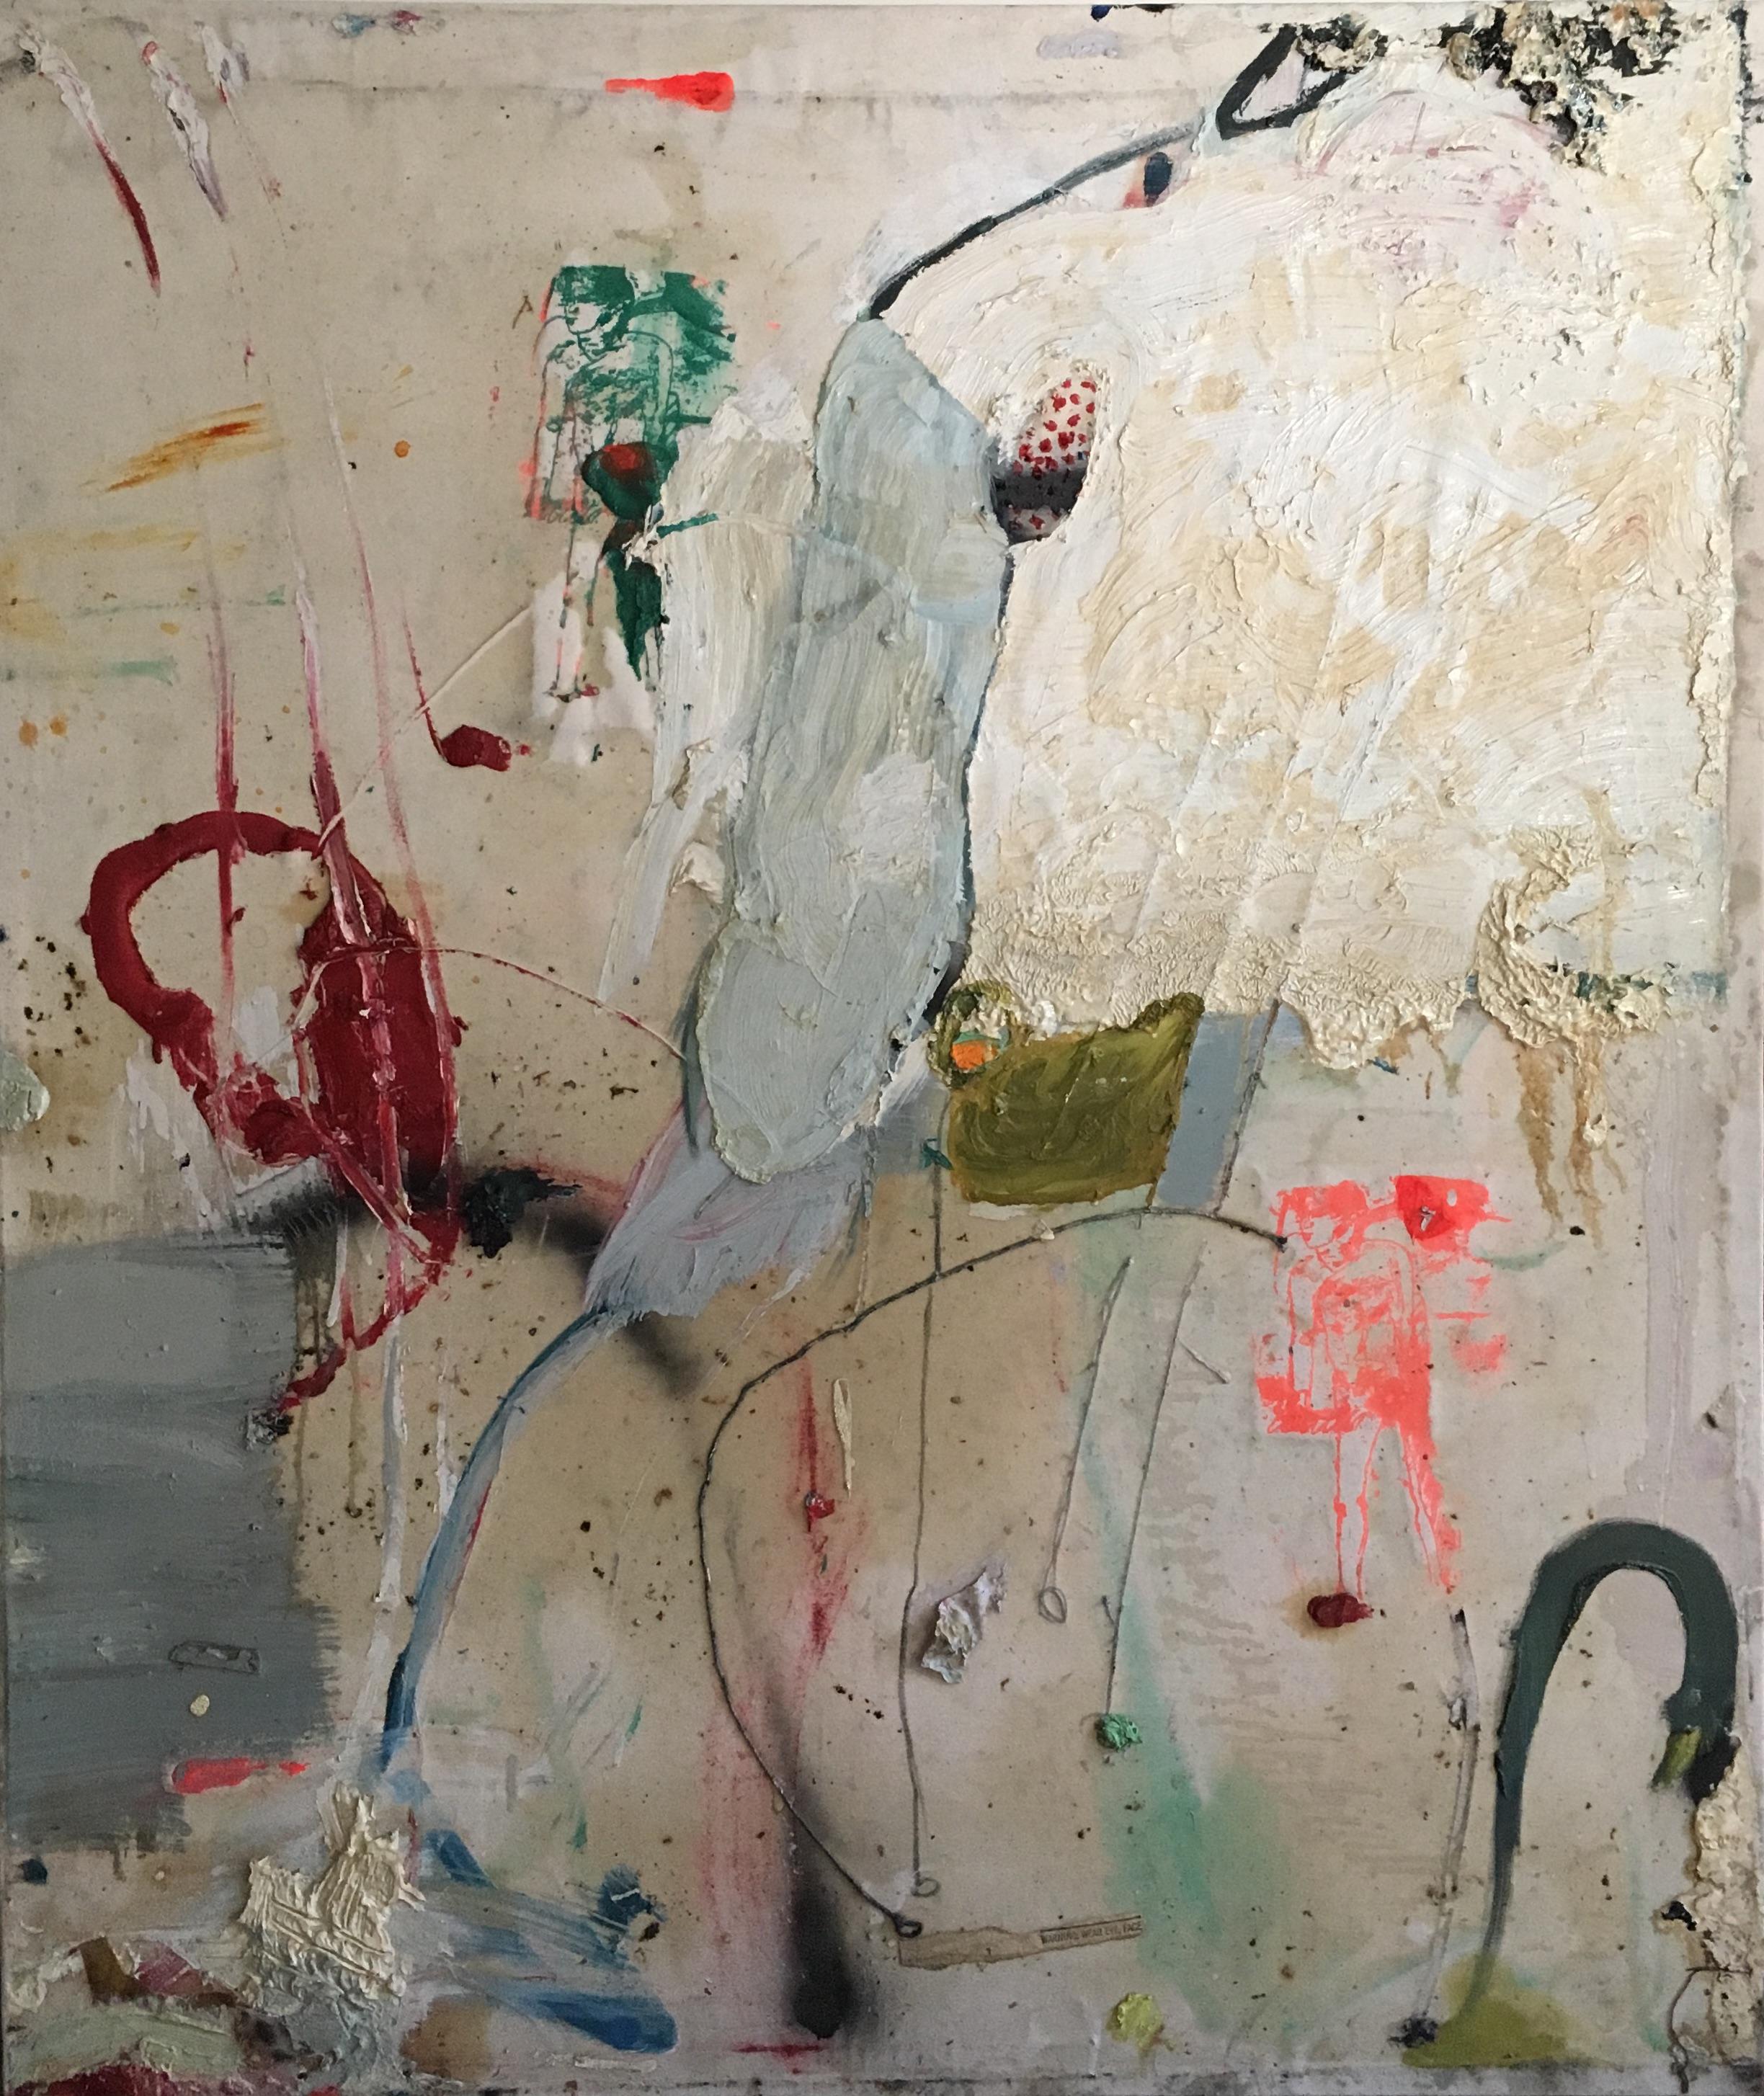 Christian Spruell (American, born 1971)
Samson and Dilouadid, 1995
Multi Media oil, spray paint, silkscreen on canvas
Signed on the verso
Unframed 50.5in H x 42.5in L 2in D

Various layers of coverage from bare canvas to extremely thick impasto. 